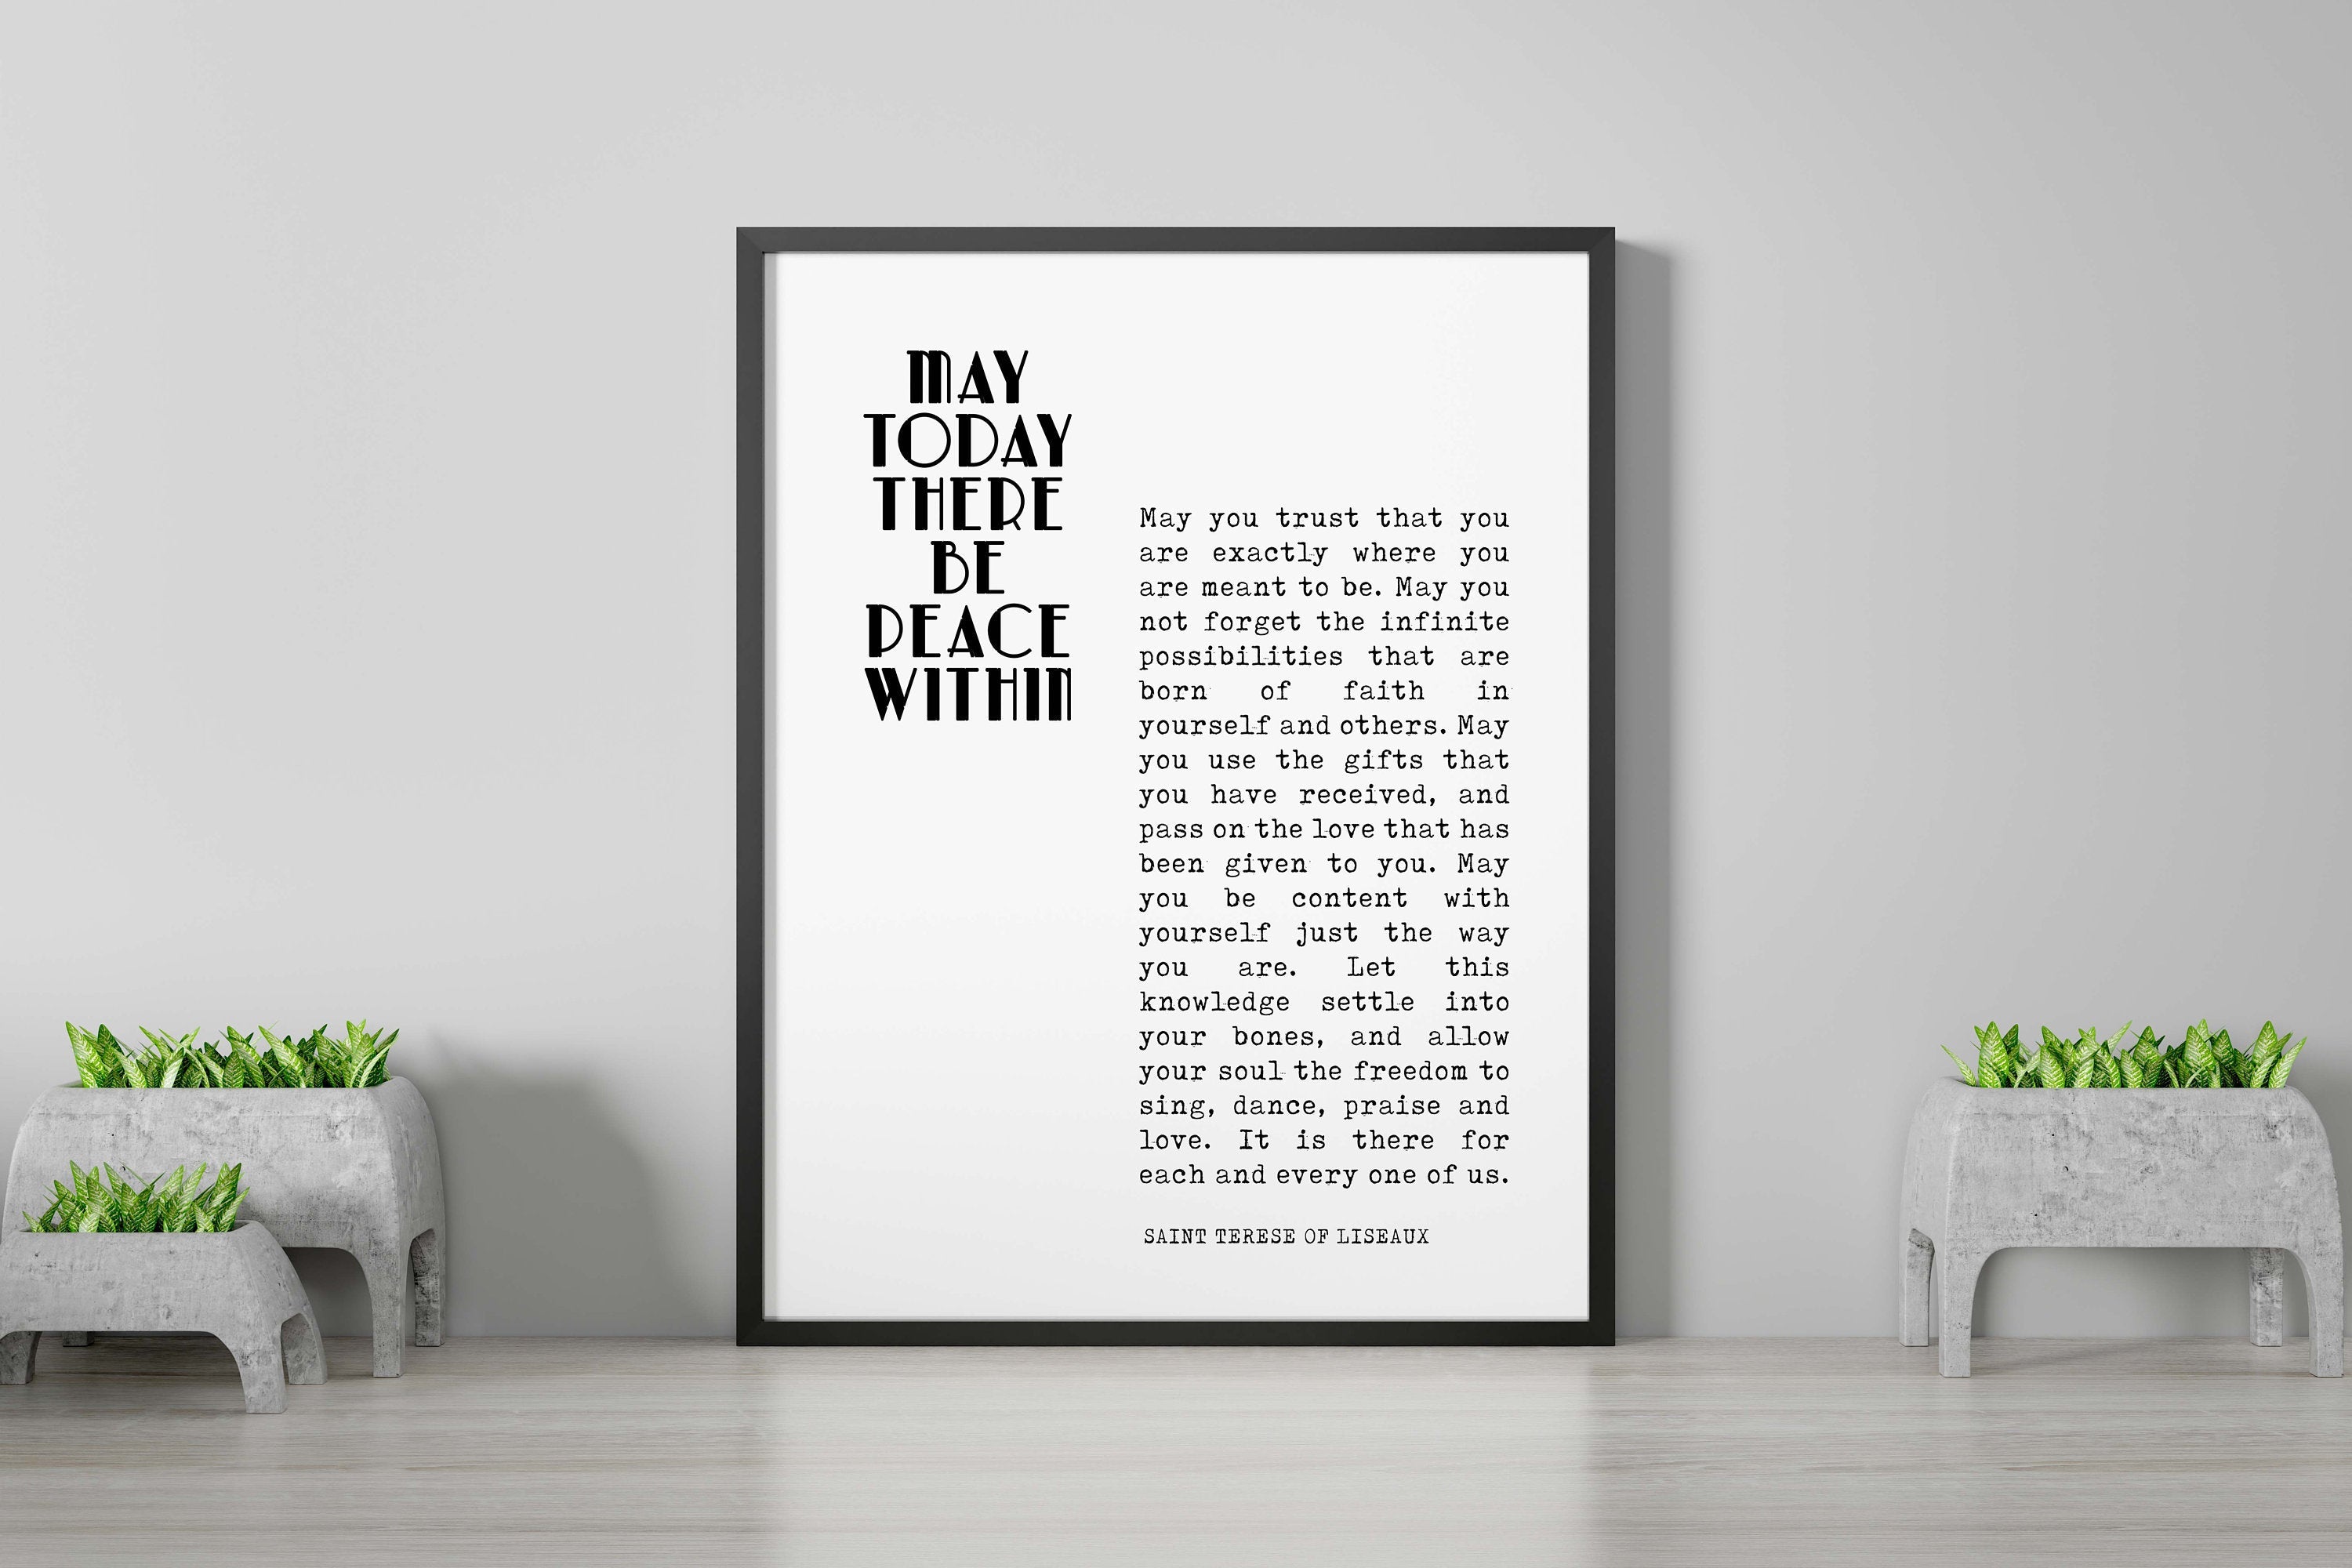 St Therese of Lisieux Peace Quote Print May Today There Be Peace Within